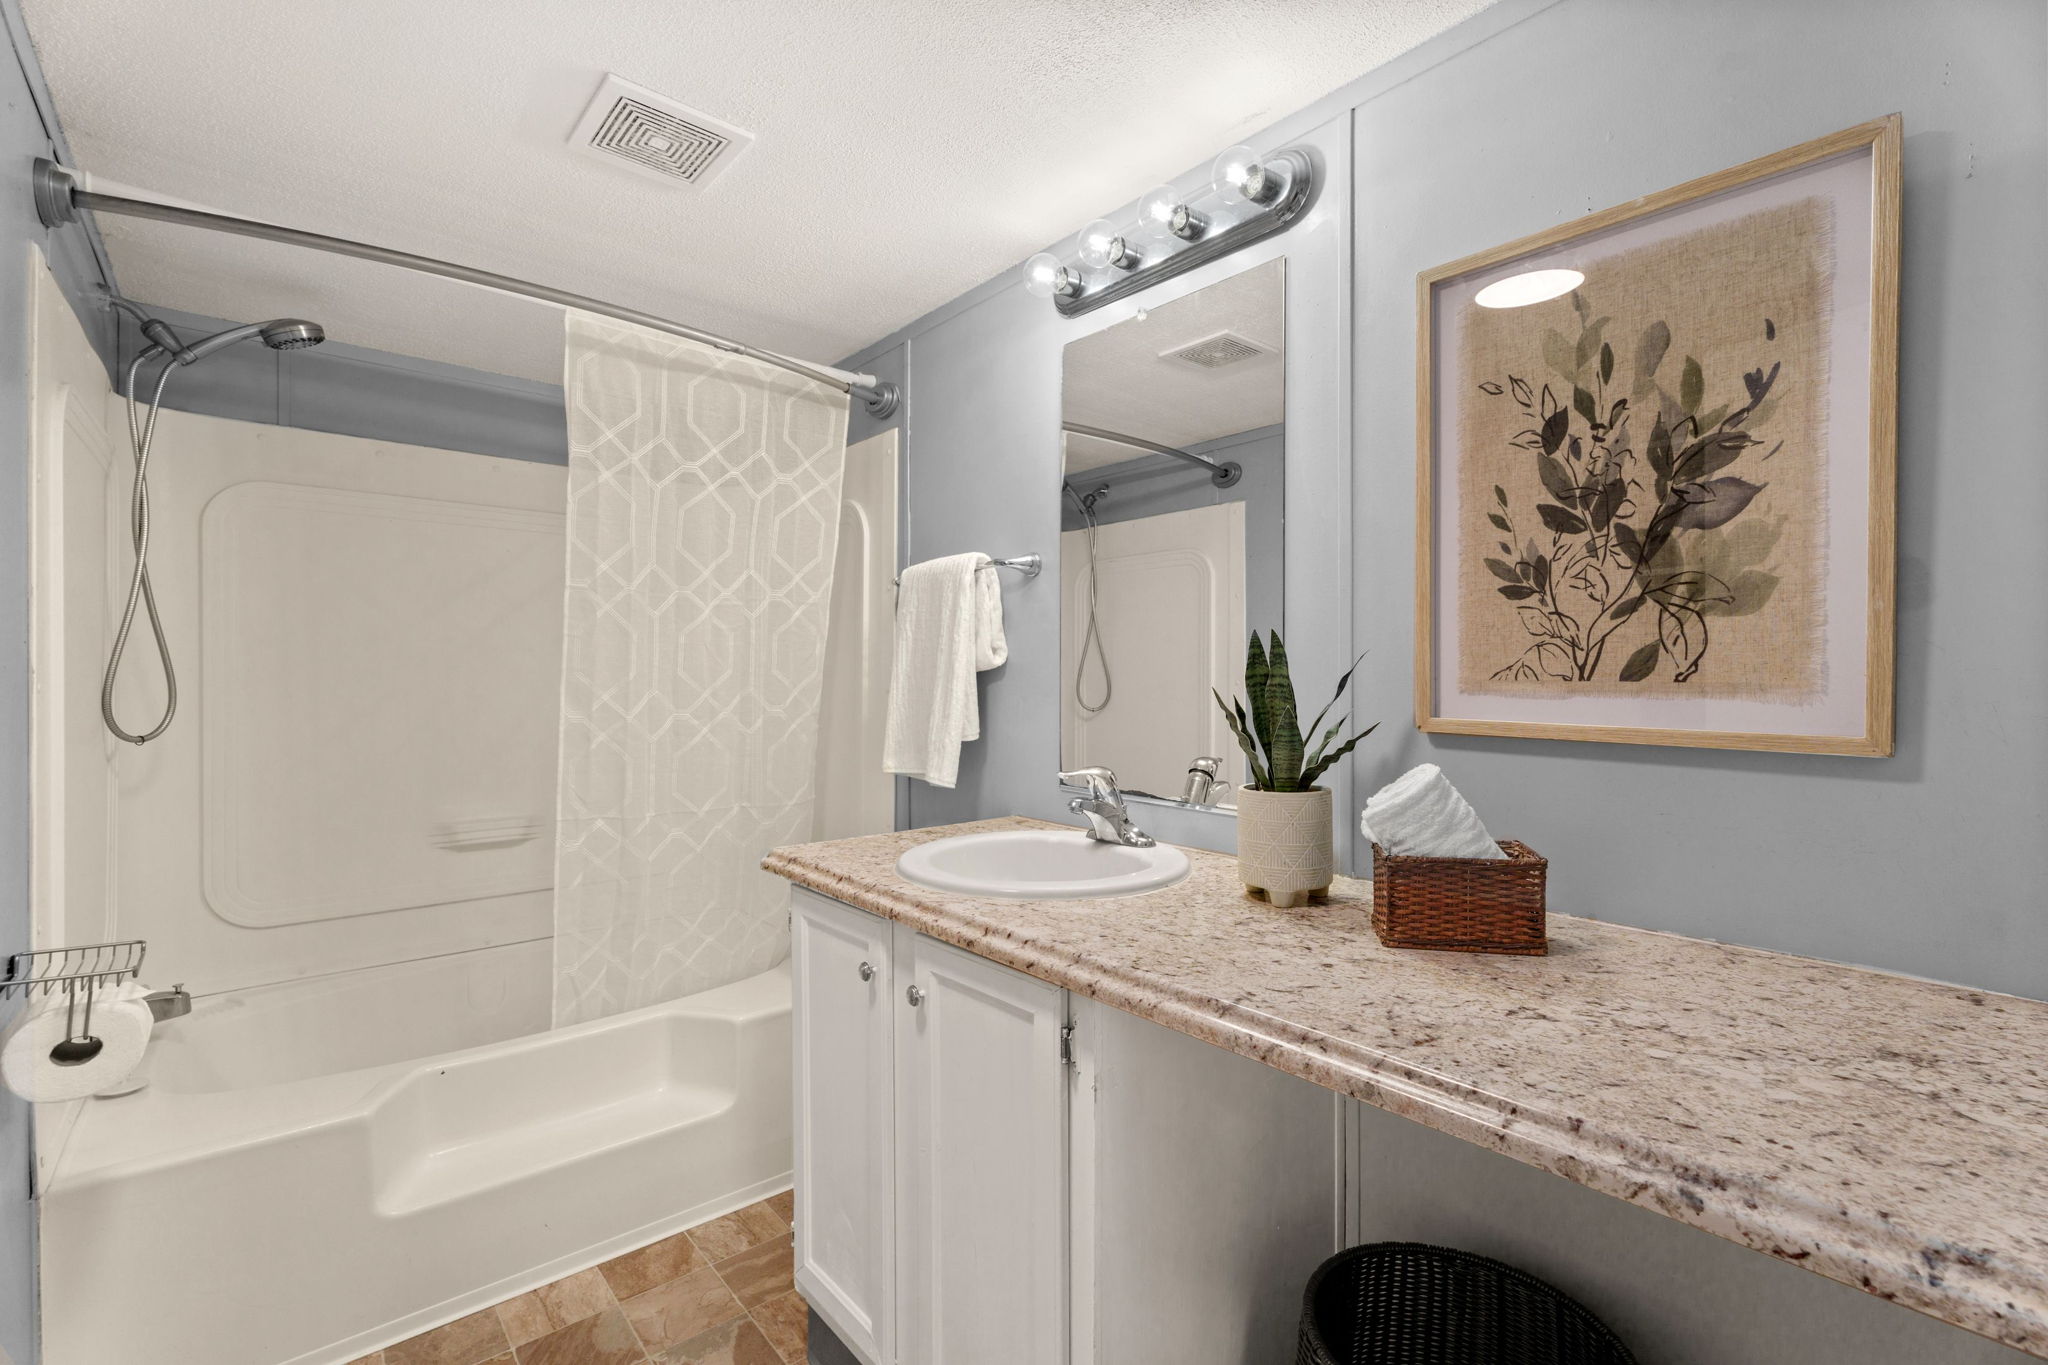 Private primary bathroom with large soaking tub and shower, plenty of counter space and storage.